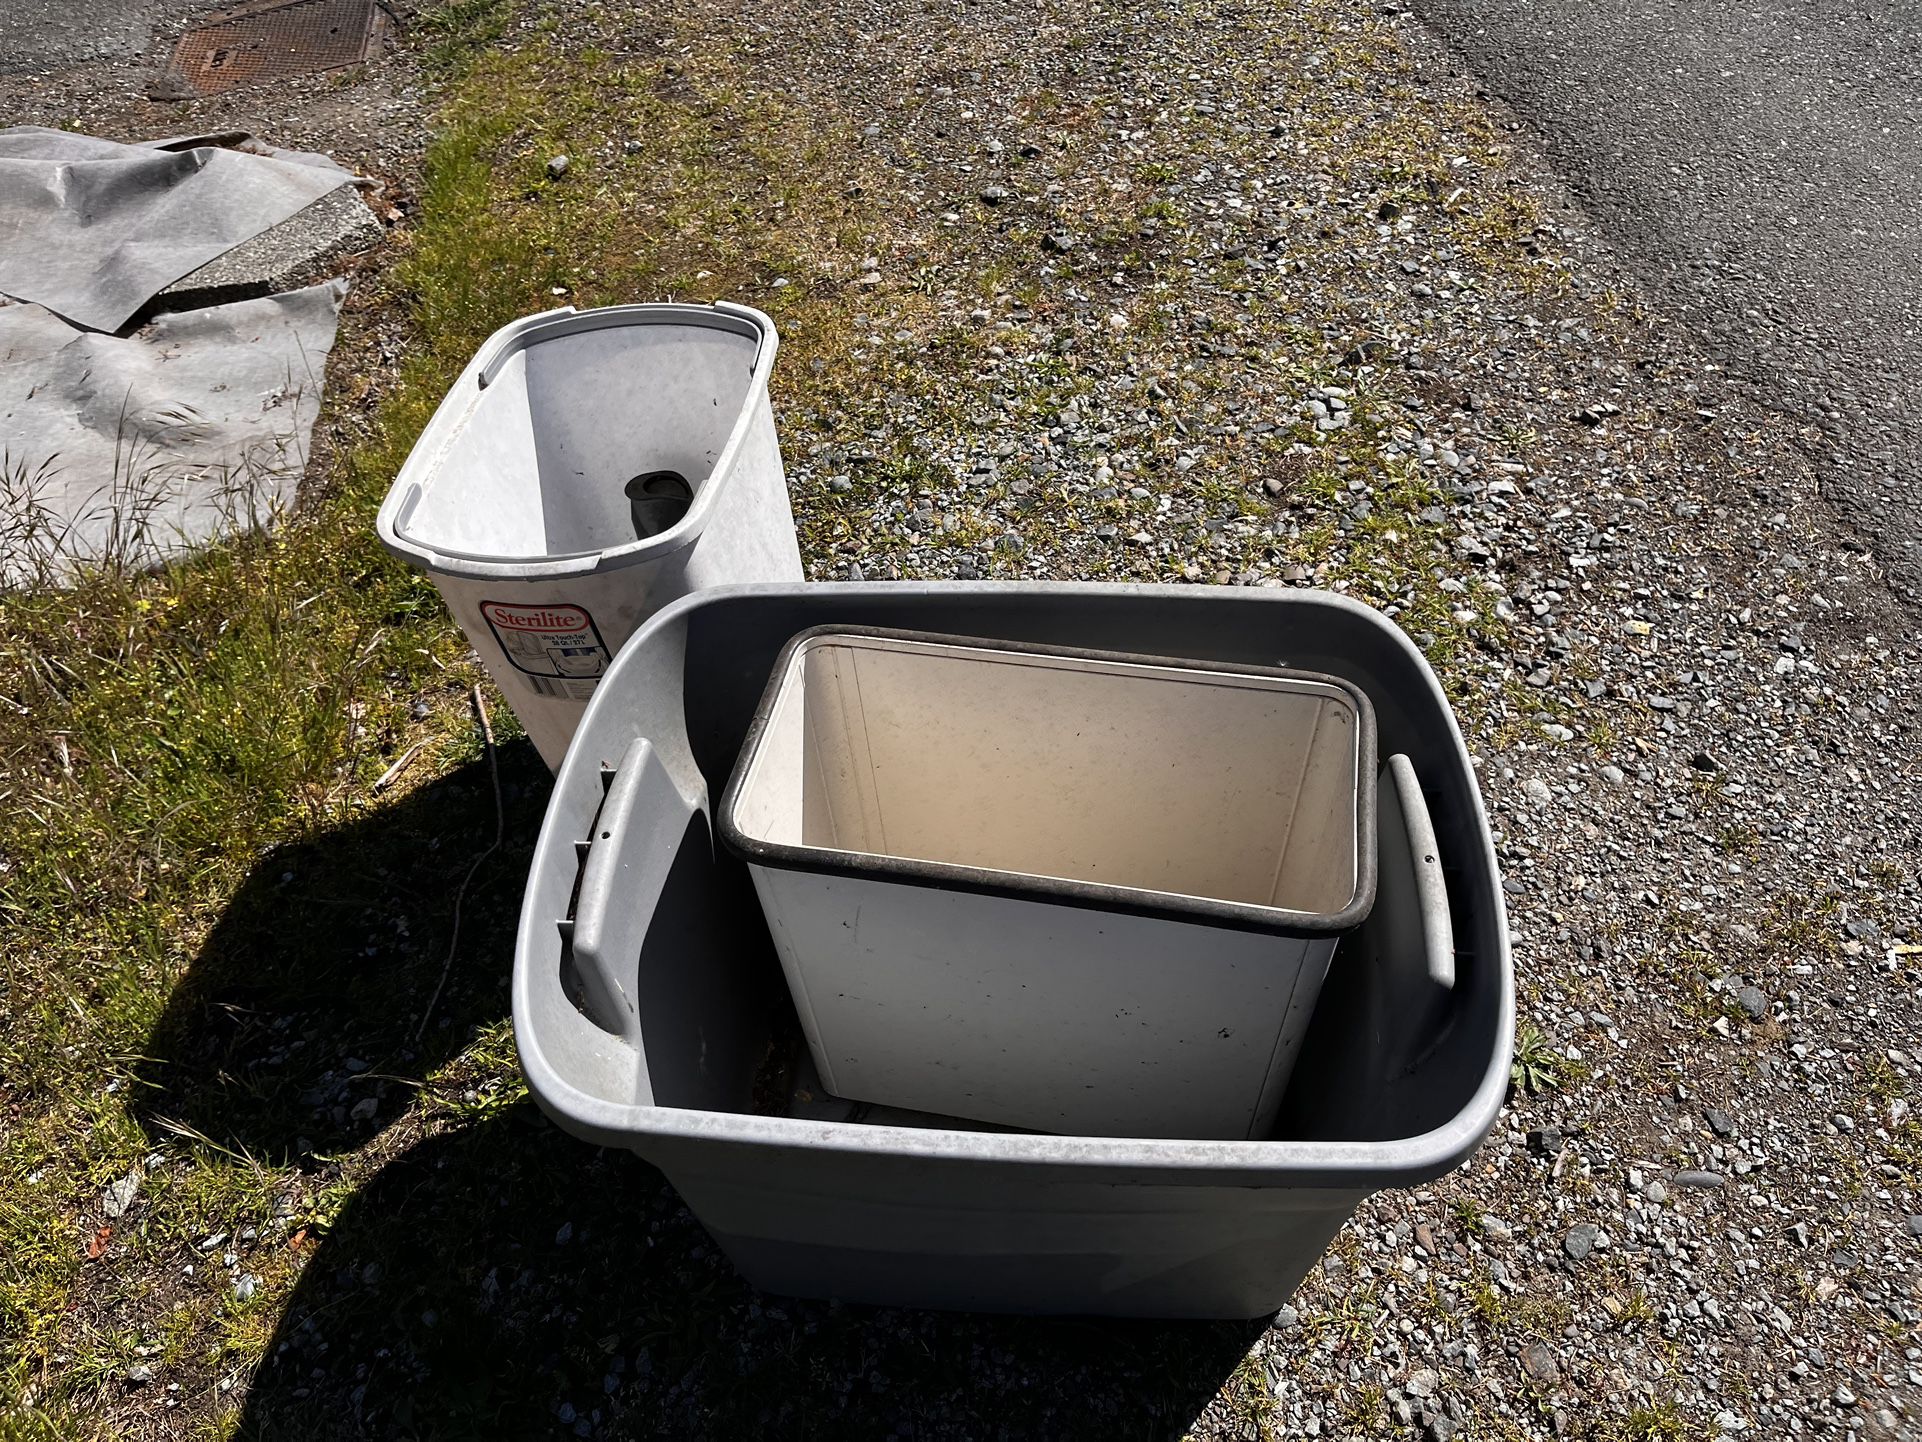 Free Outdoor Trash Cans, Bin